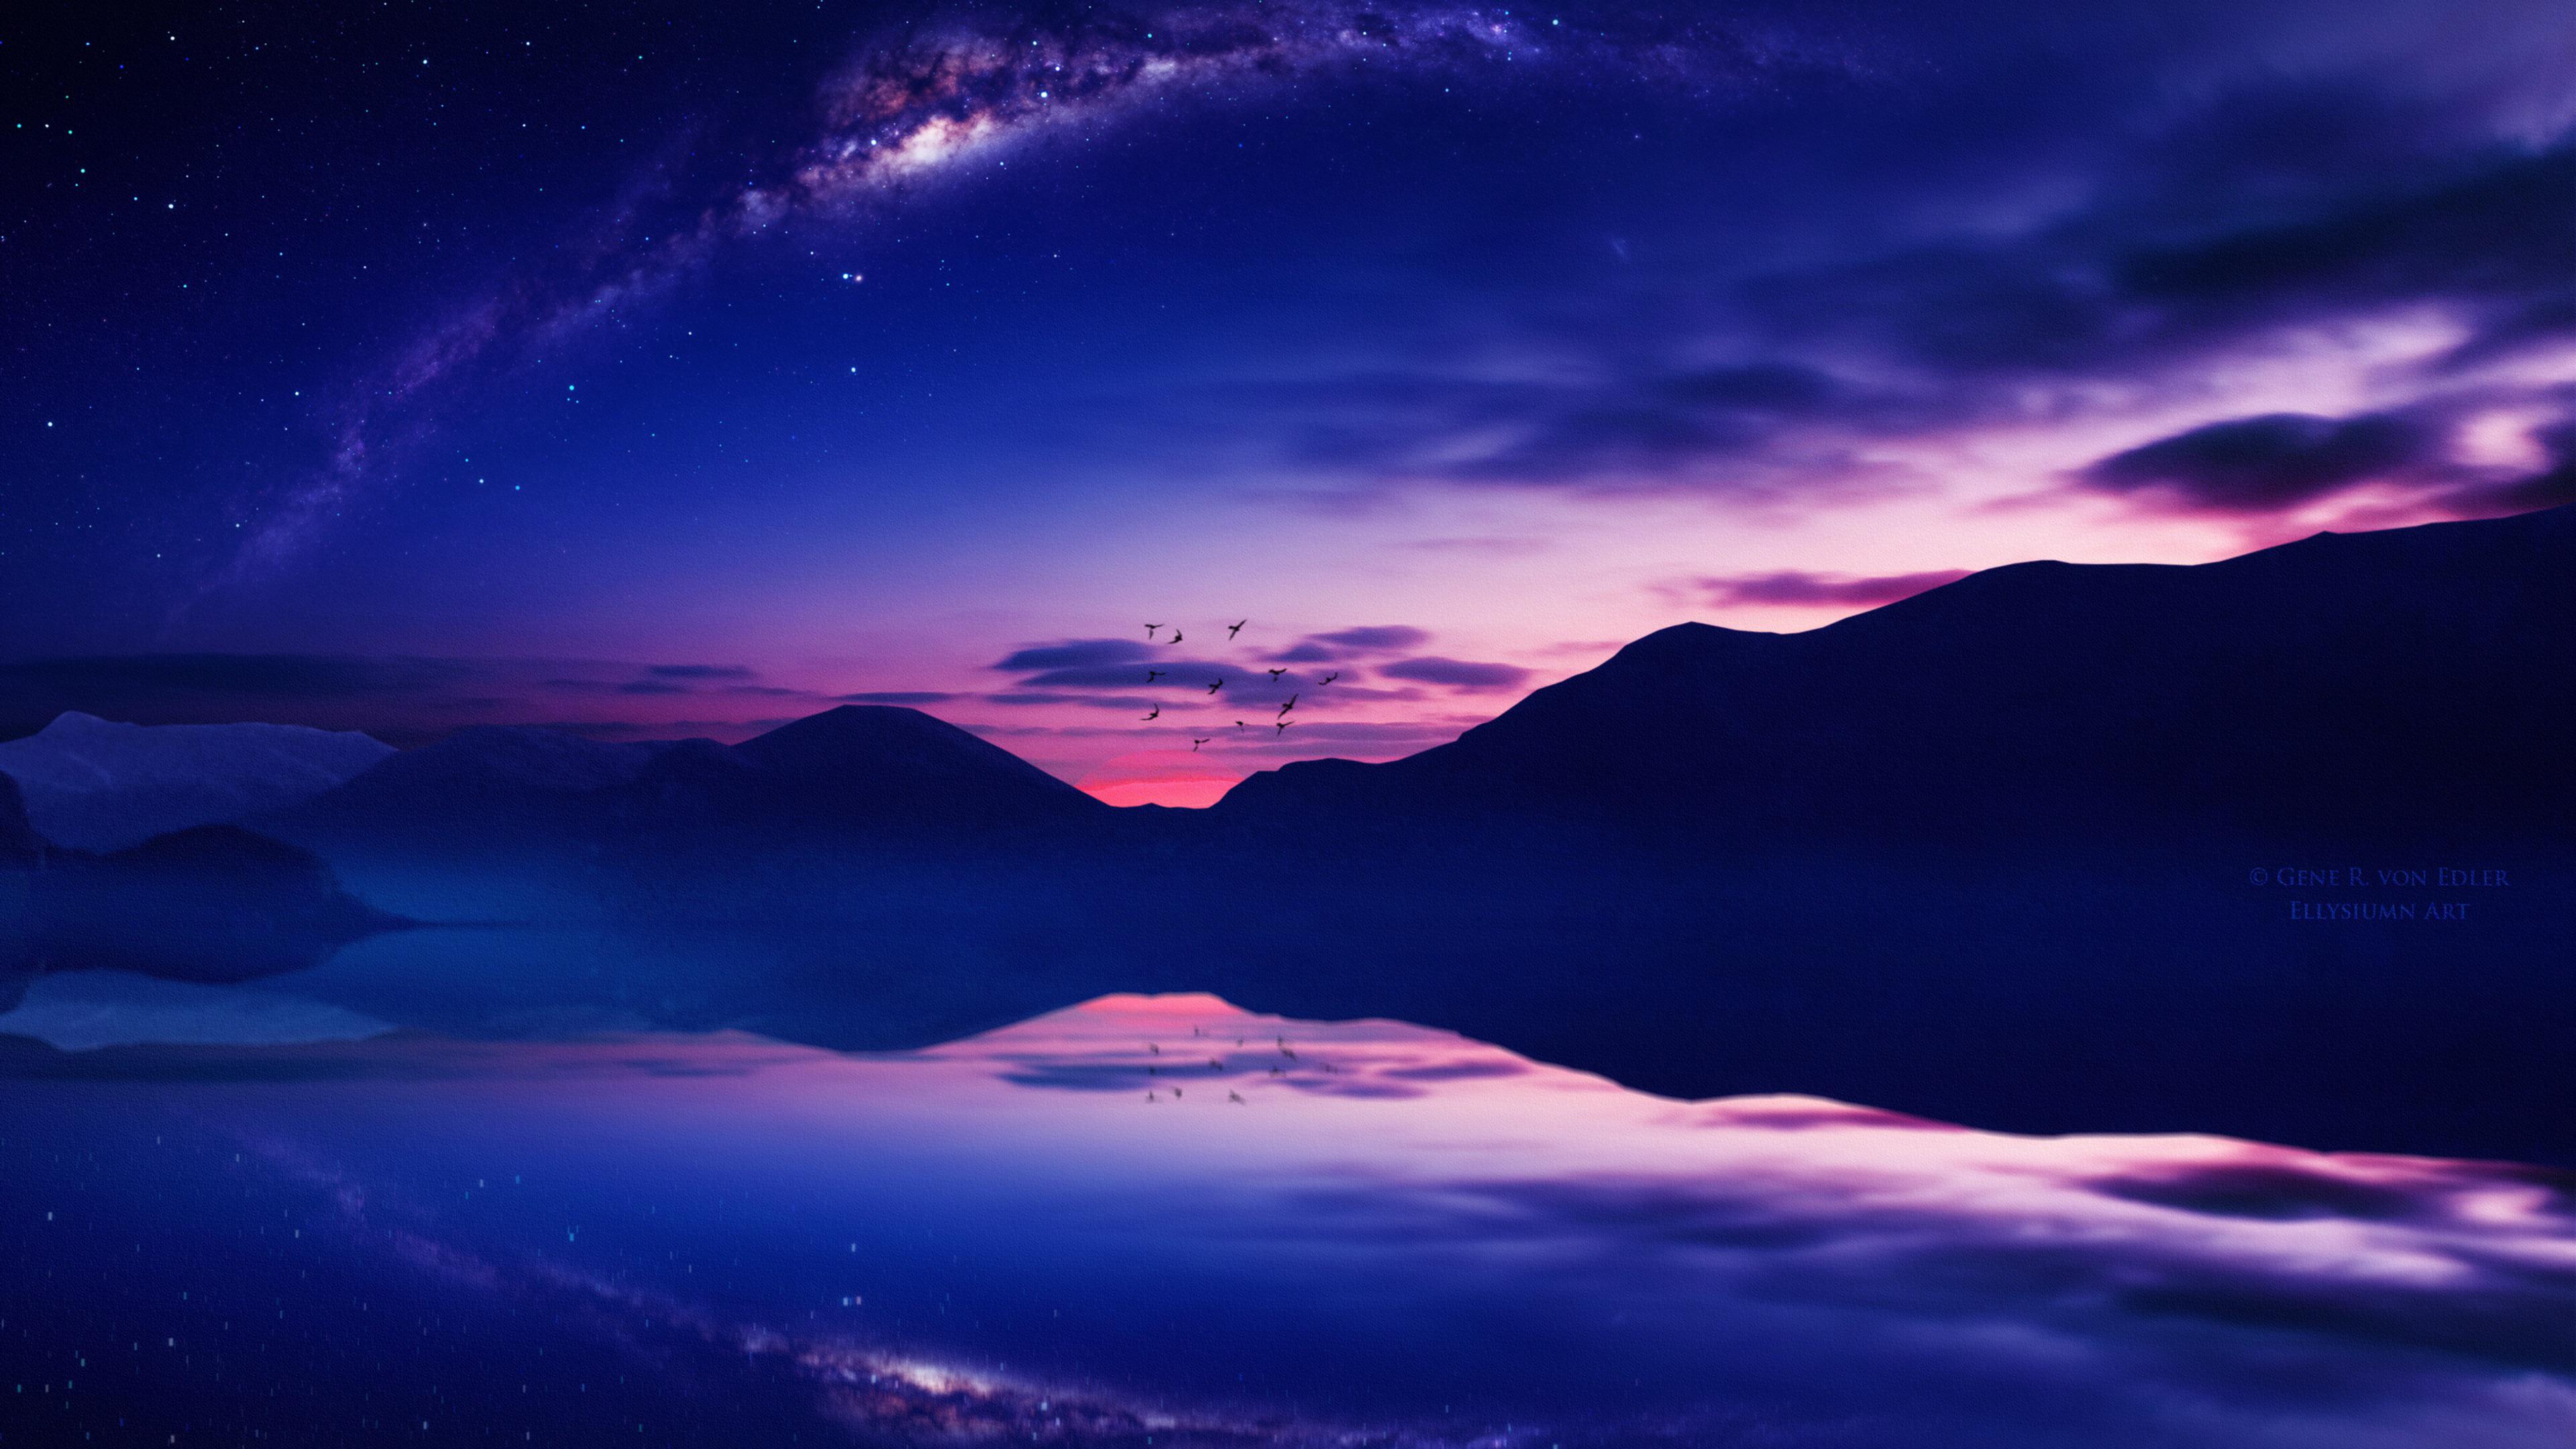 Twilight 4K wallpaper for your desktop or mobile screen free and easy to download